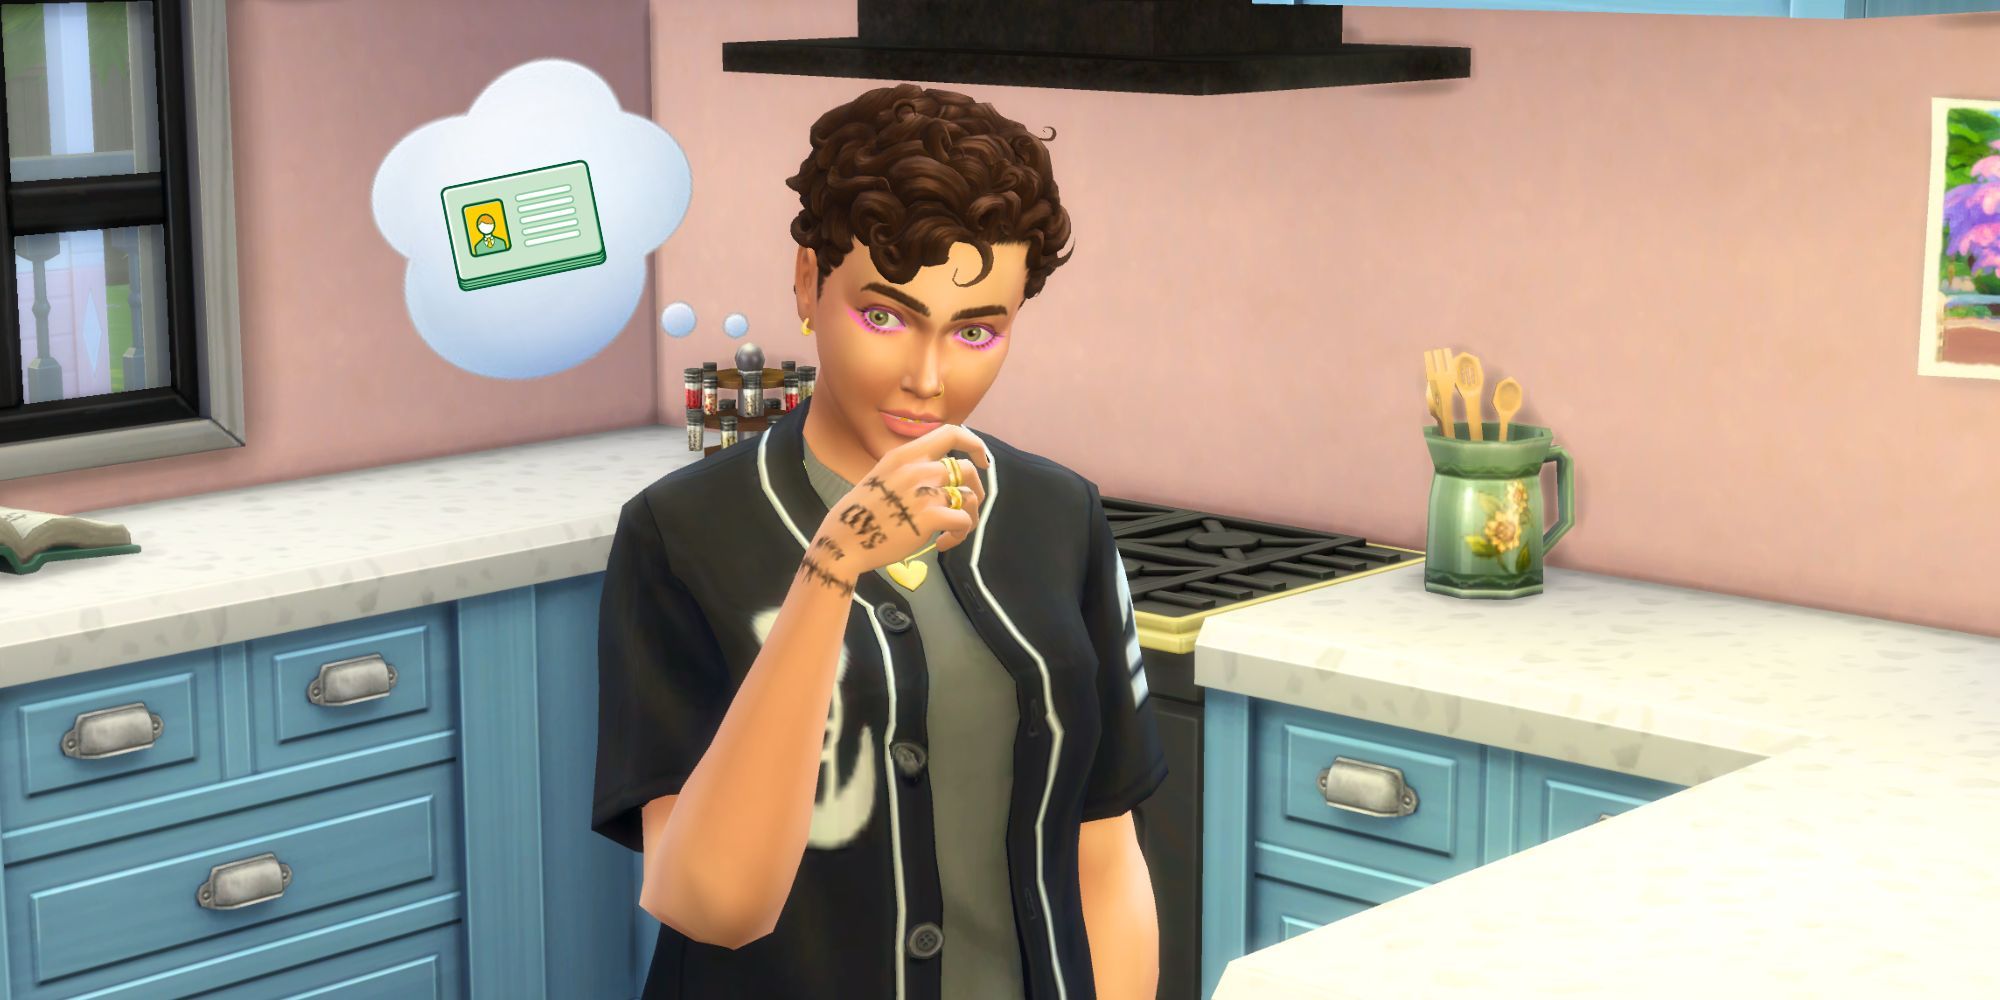 An androgynous Sim is standing in a pink and blue kitchen, looking confused. Above their head, a thought bubble contains an illustration of a photo identification card.